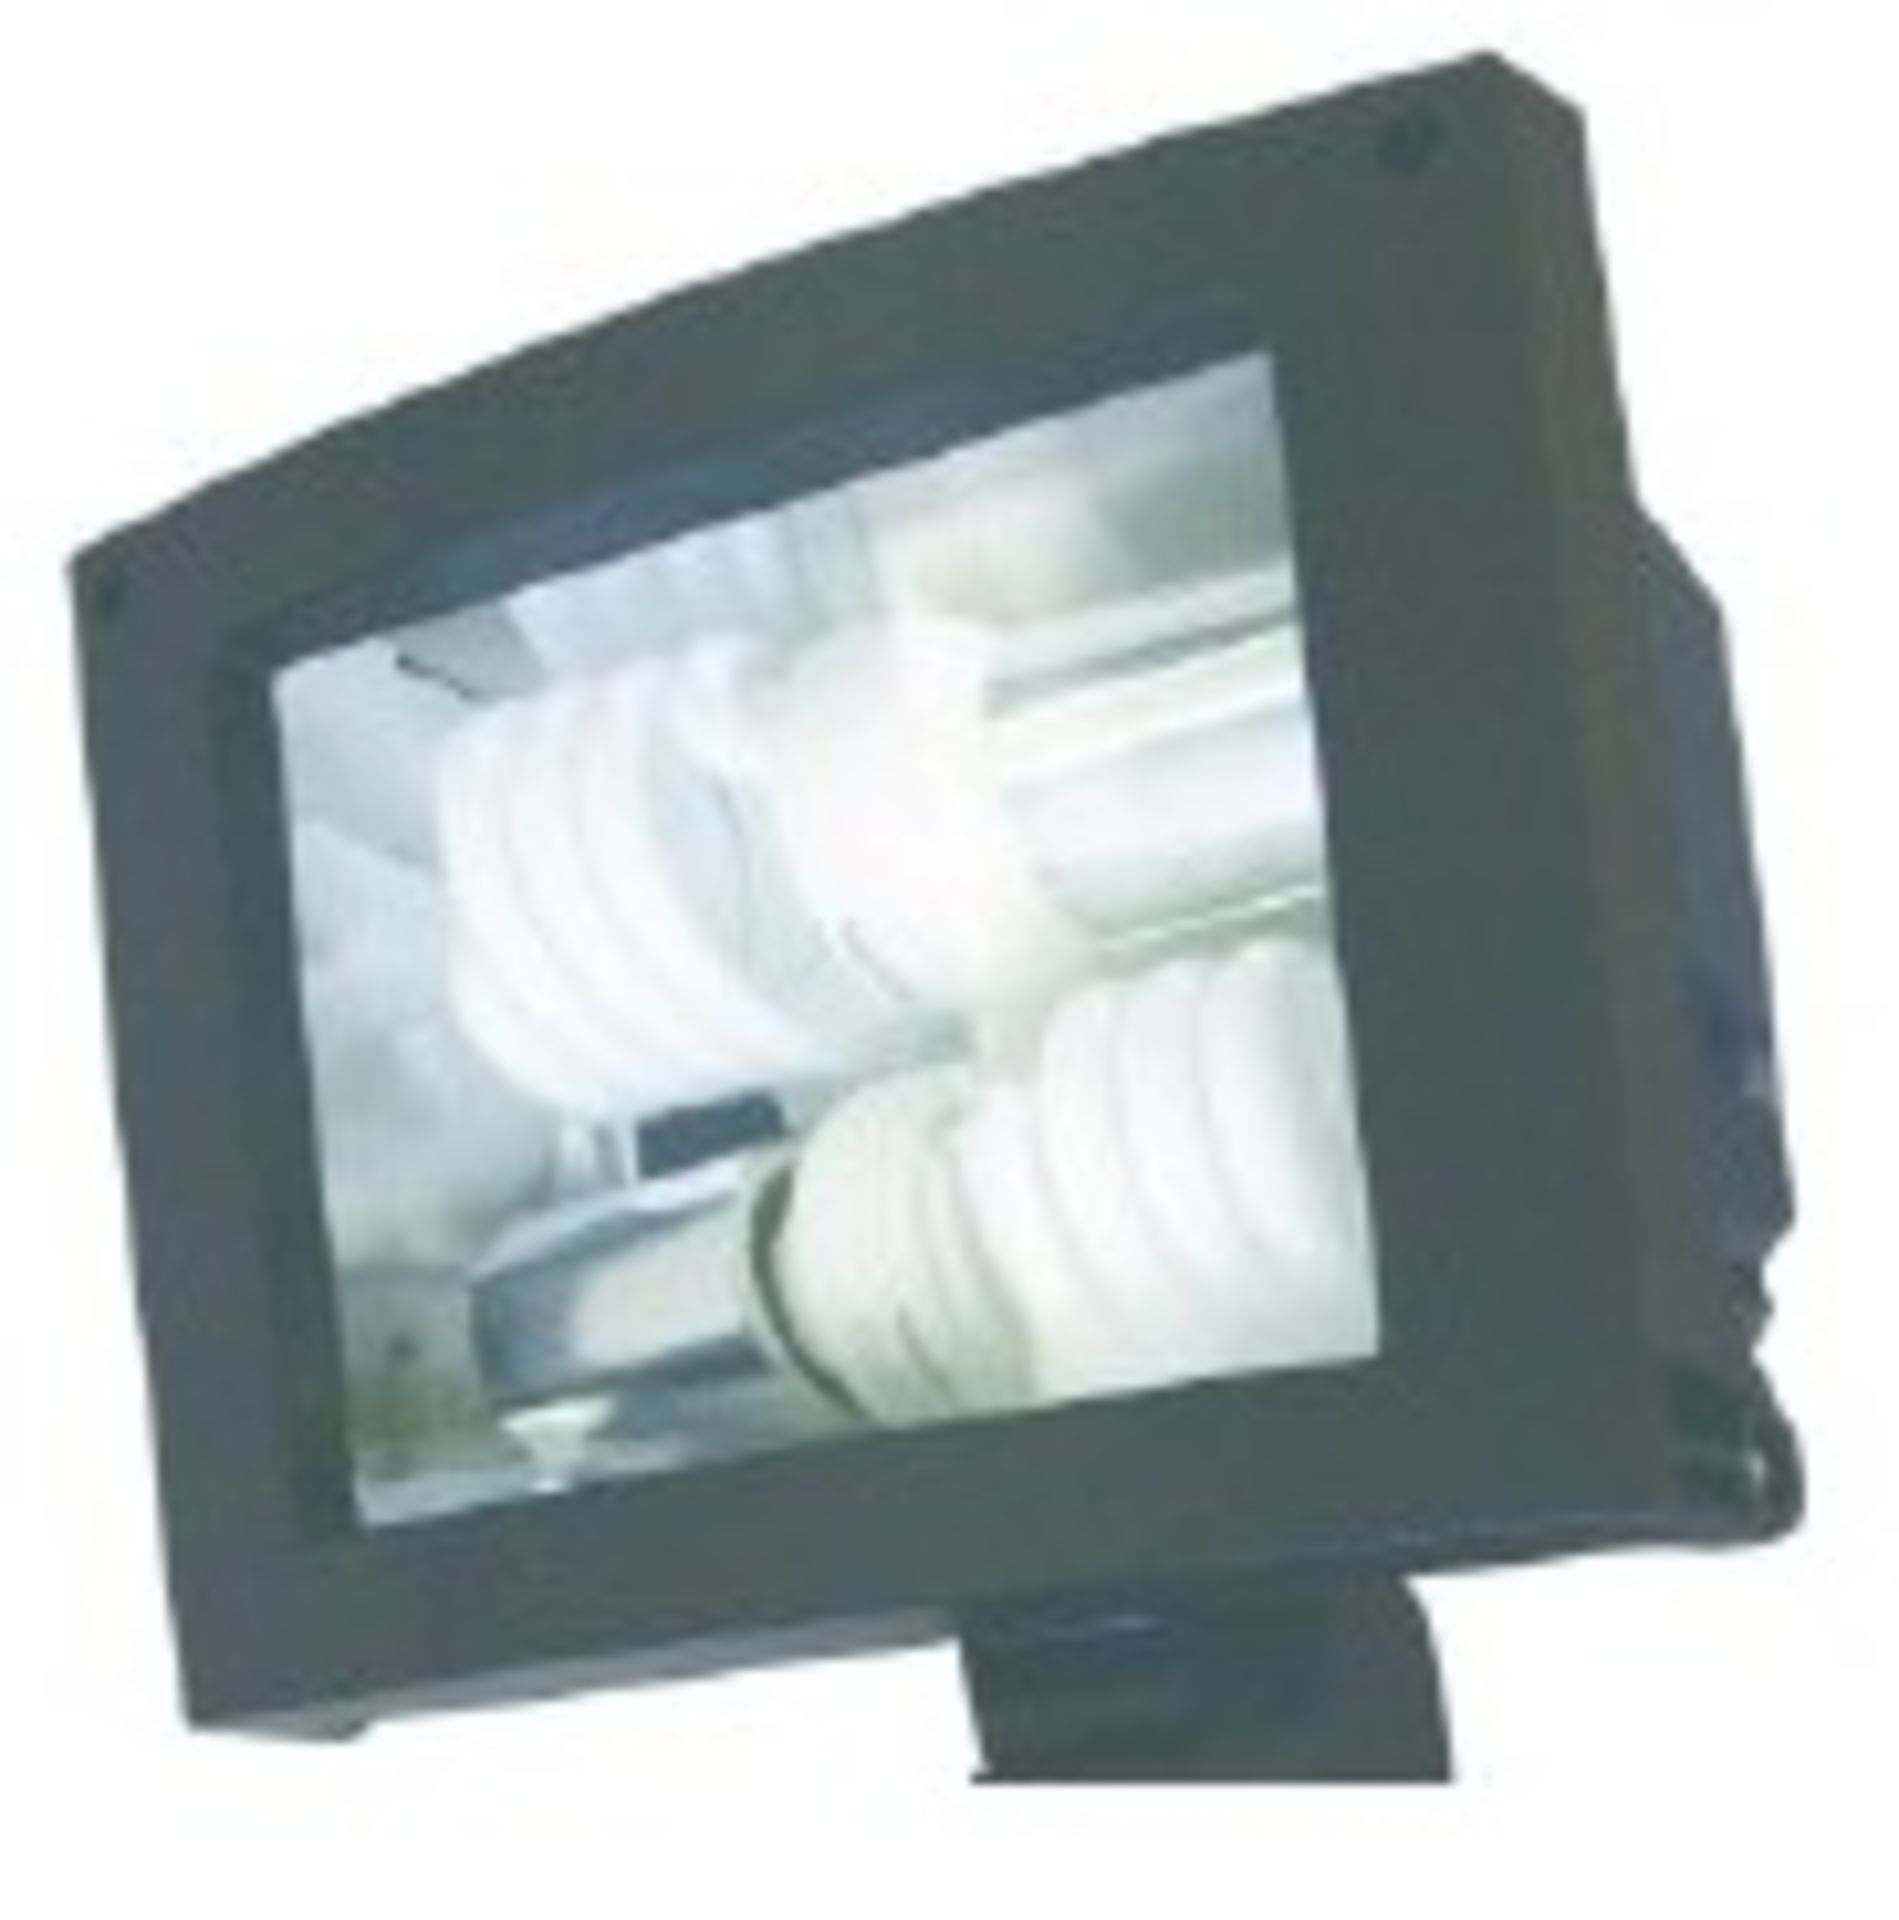 V *TRADE QTY* Brand New Luxform Security/Floodlight Outdoor Light 240v ISP - £20.50 X 6 YOUR BID